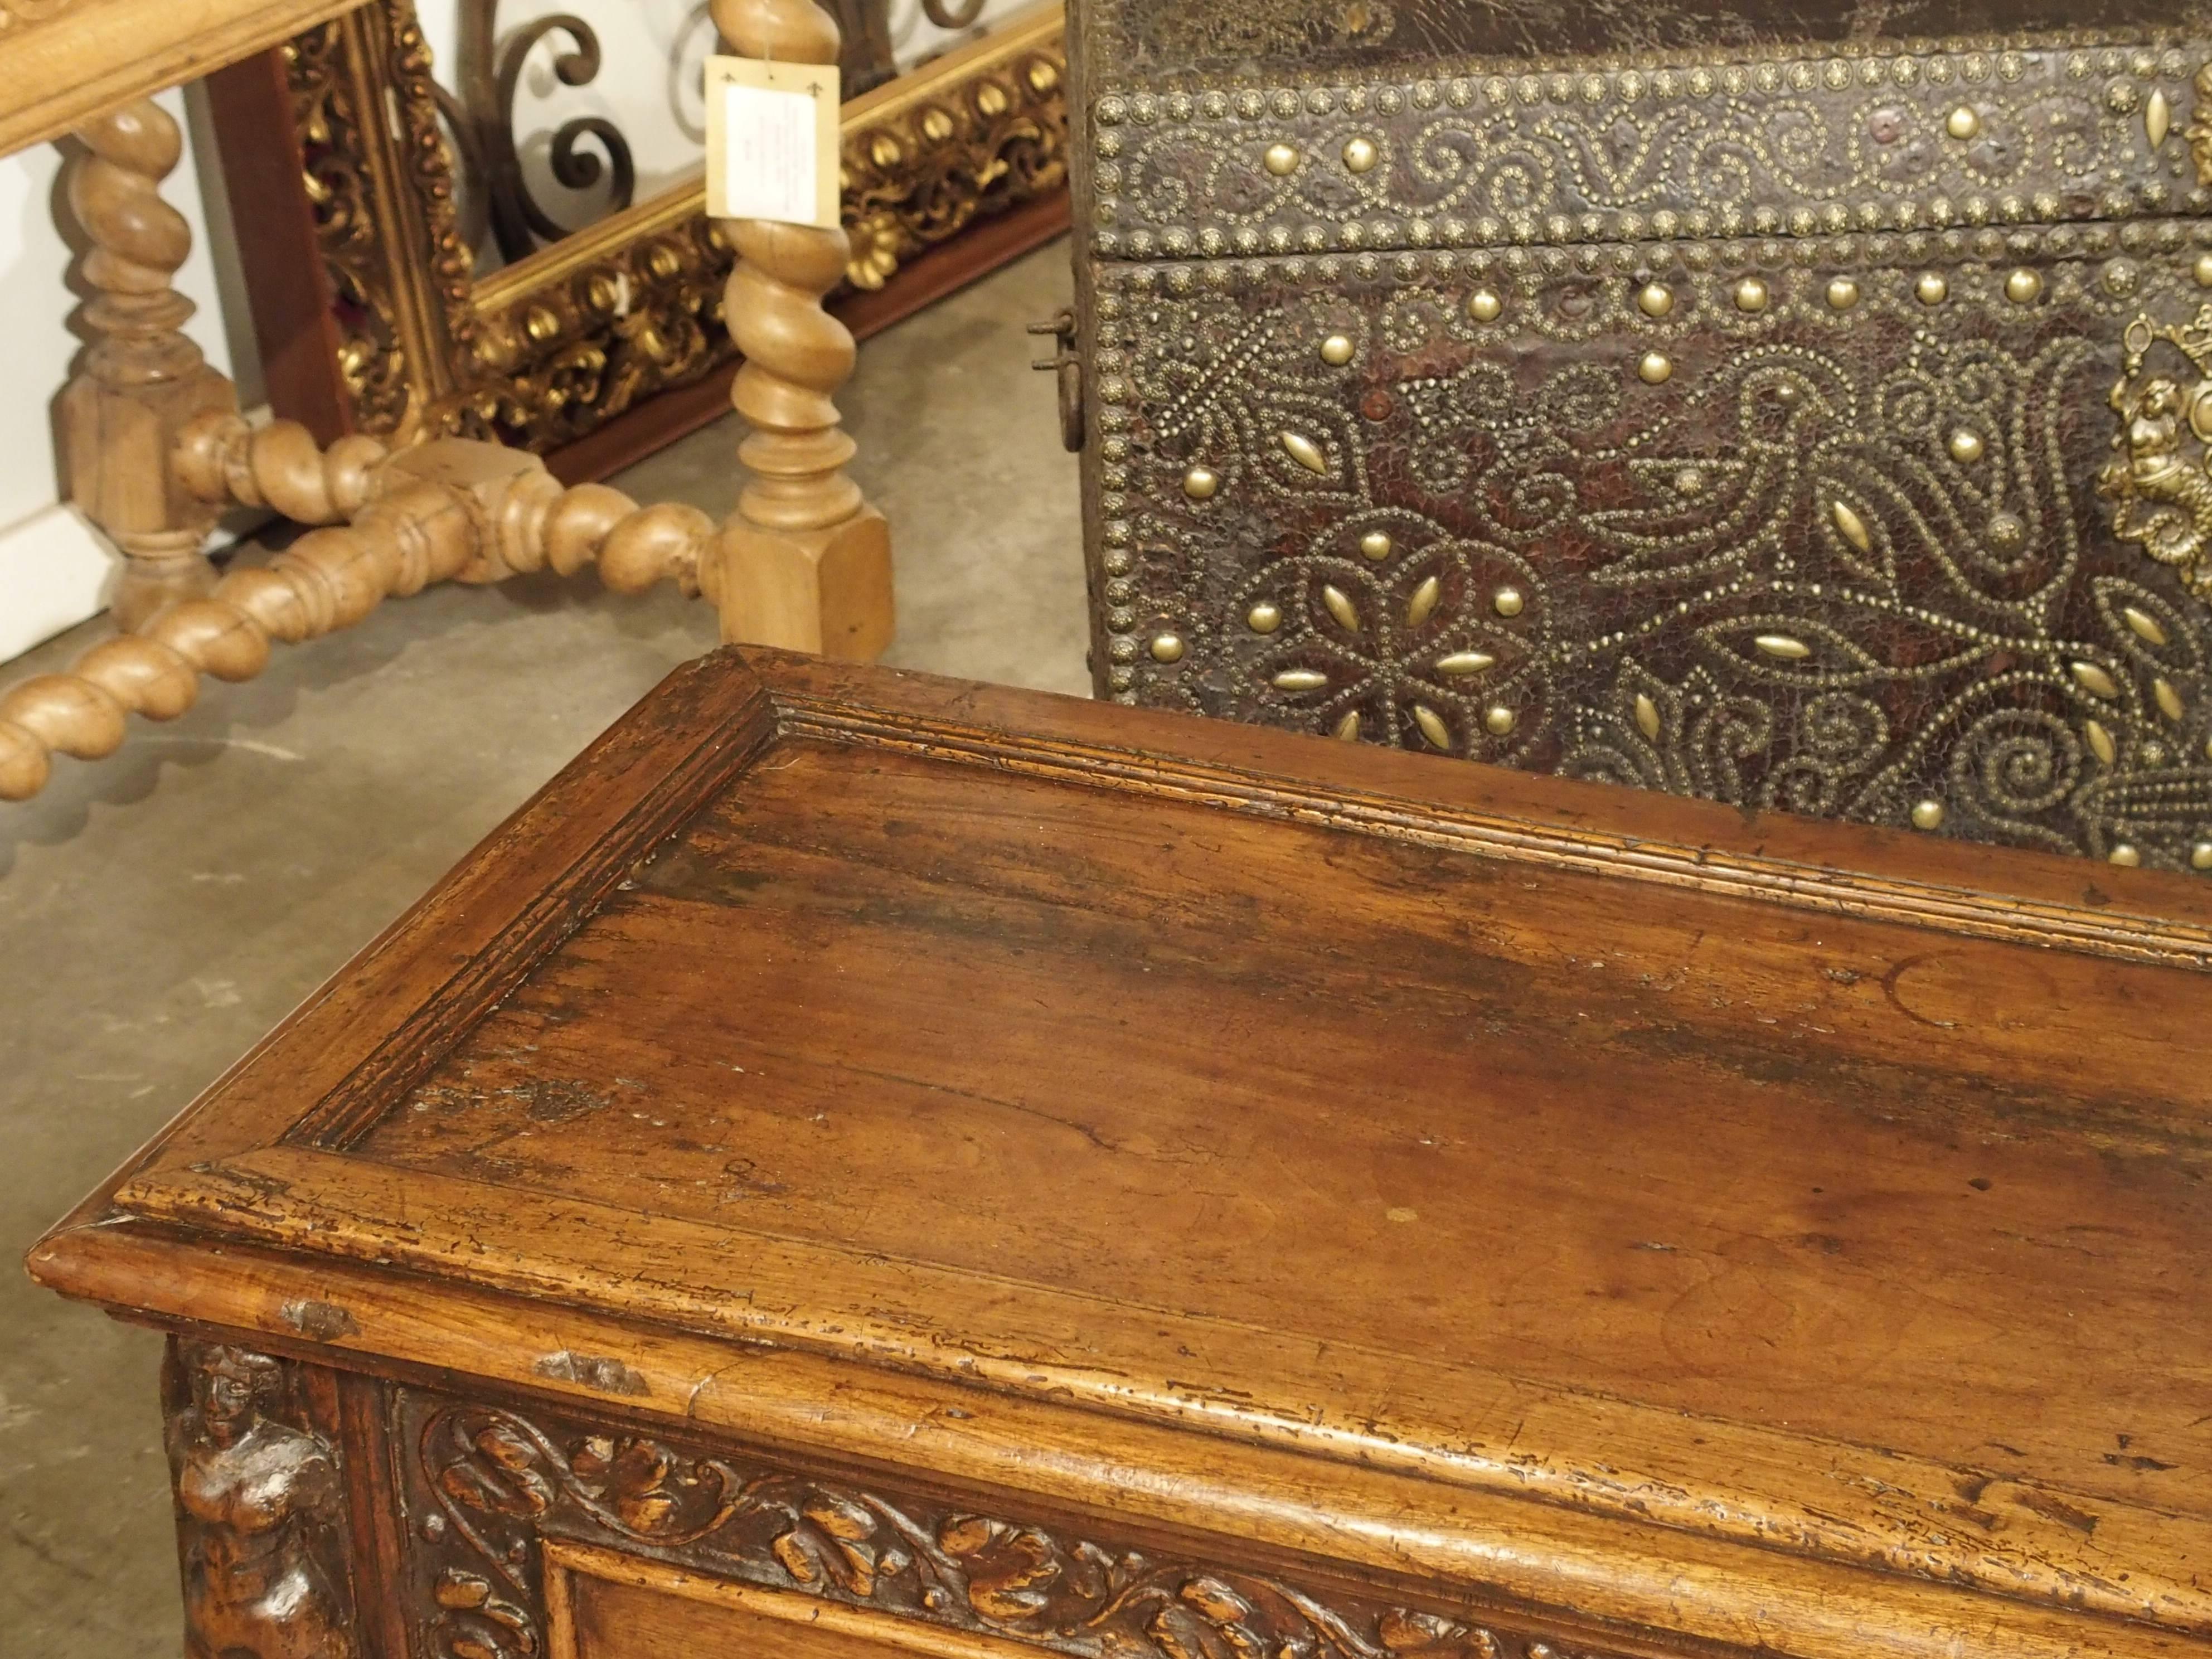 The cassone (coffer or trunk) was an Italian innovation during the 15th century, principally in Florence. It featured various hand-carved motifs from nature, animal origin, human origin and more. Often the feet were lion’s paws, and they were used